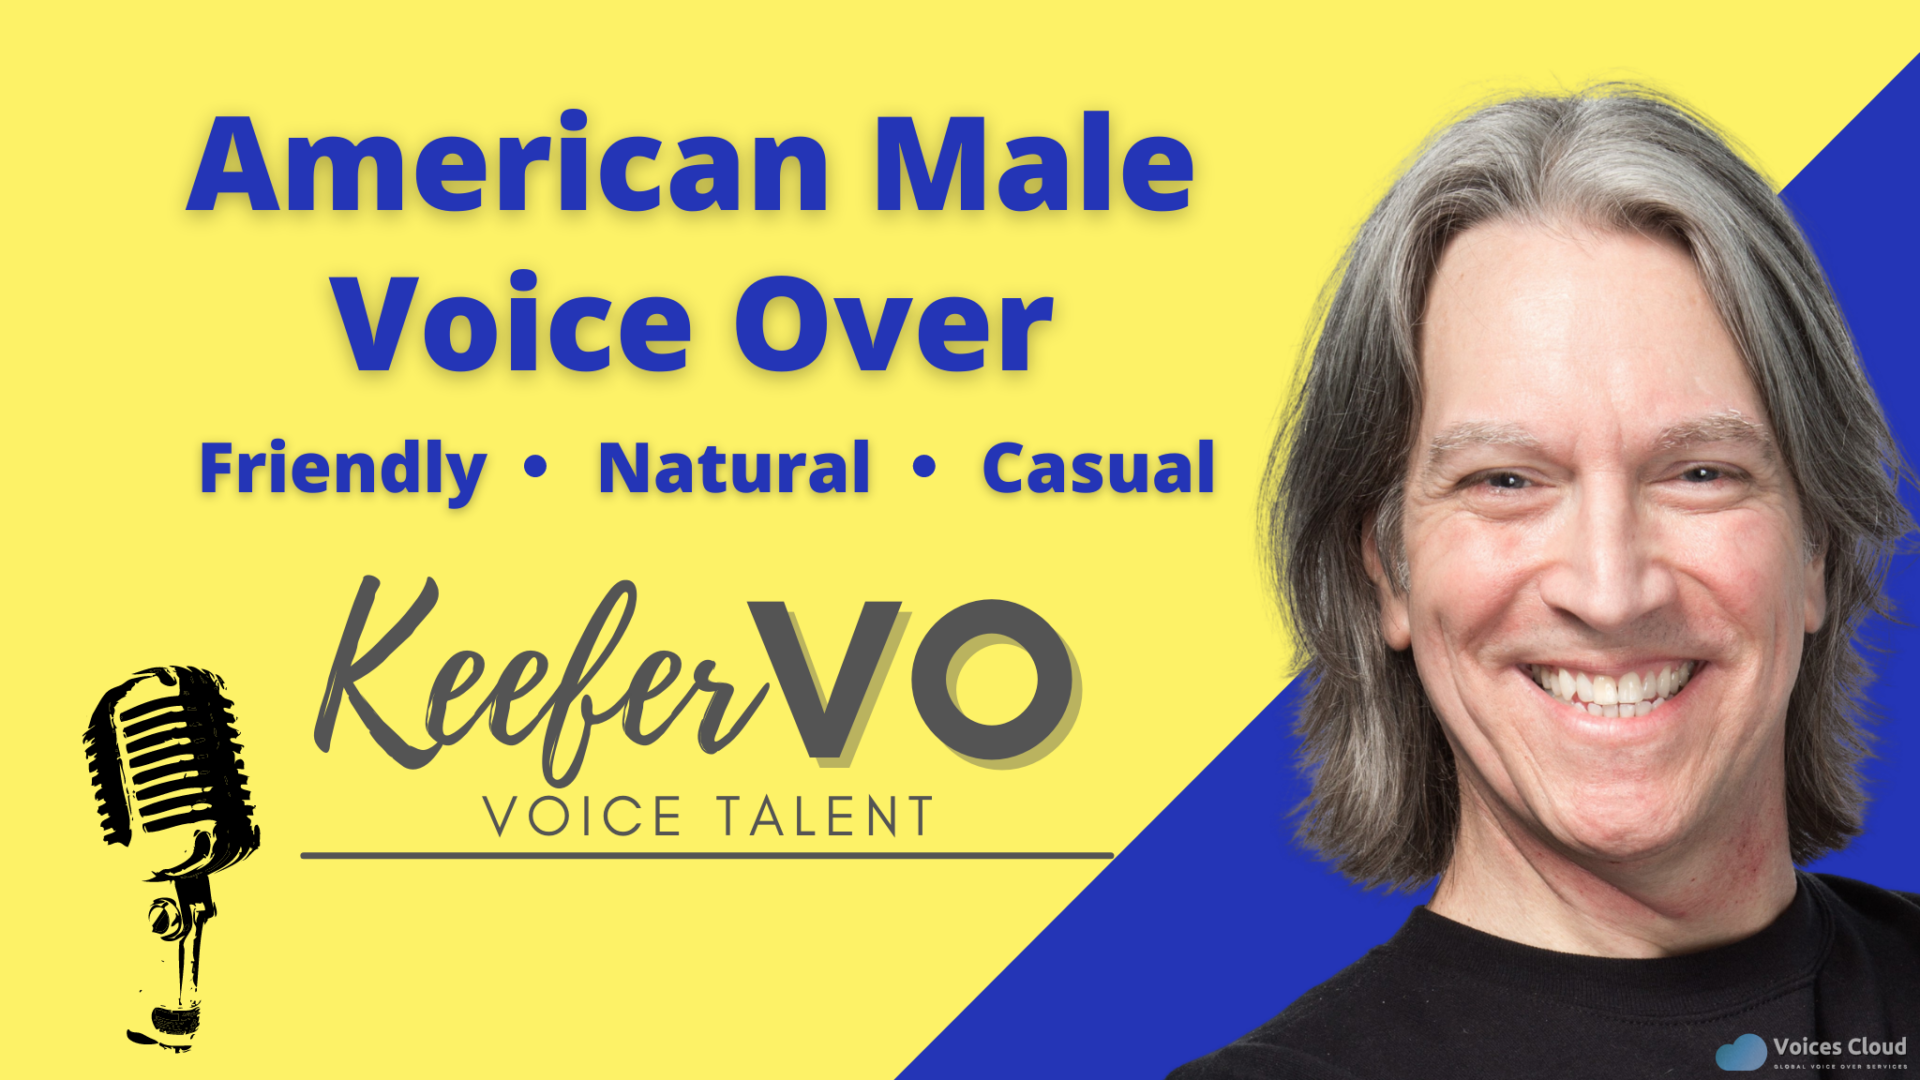 14314Friendly, Natural American Male Voice Over